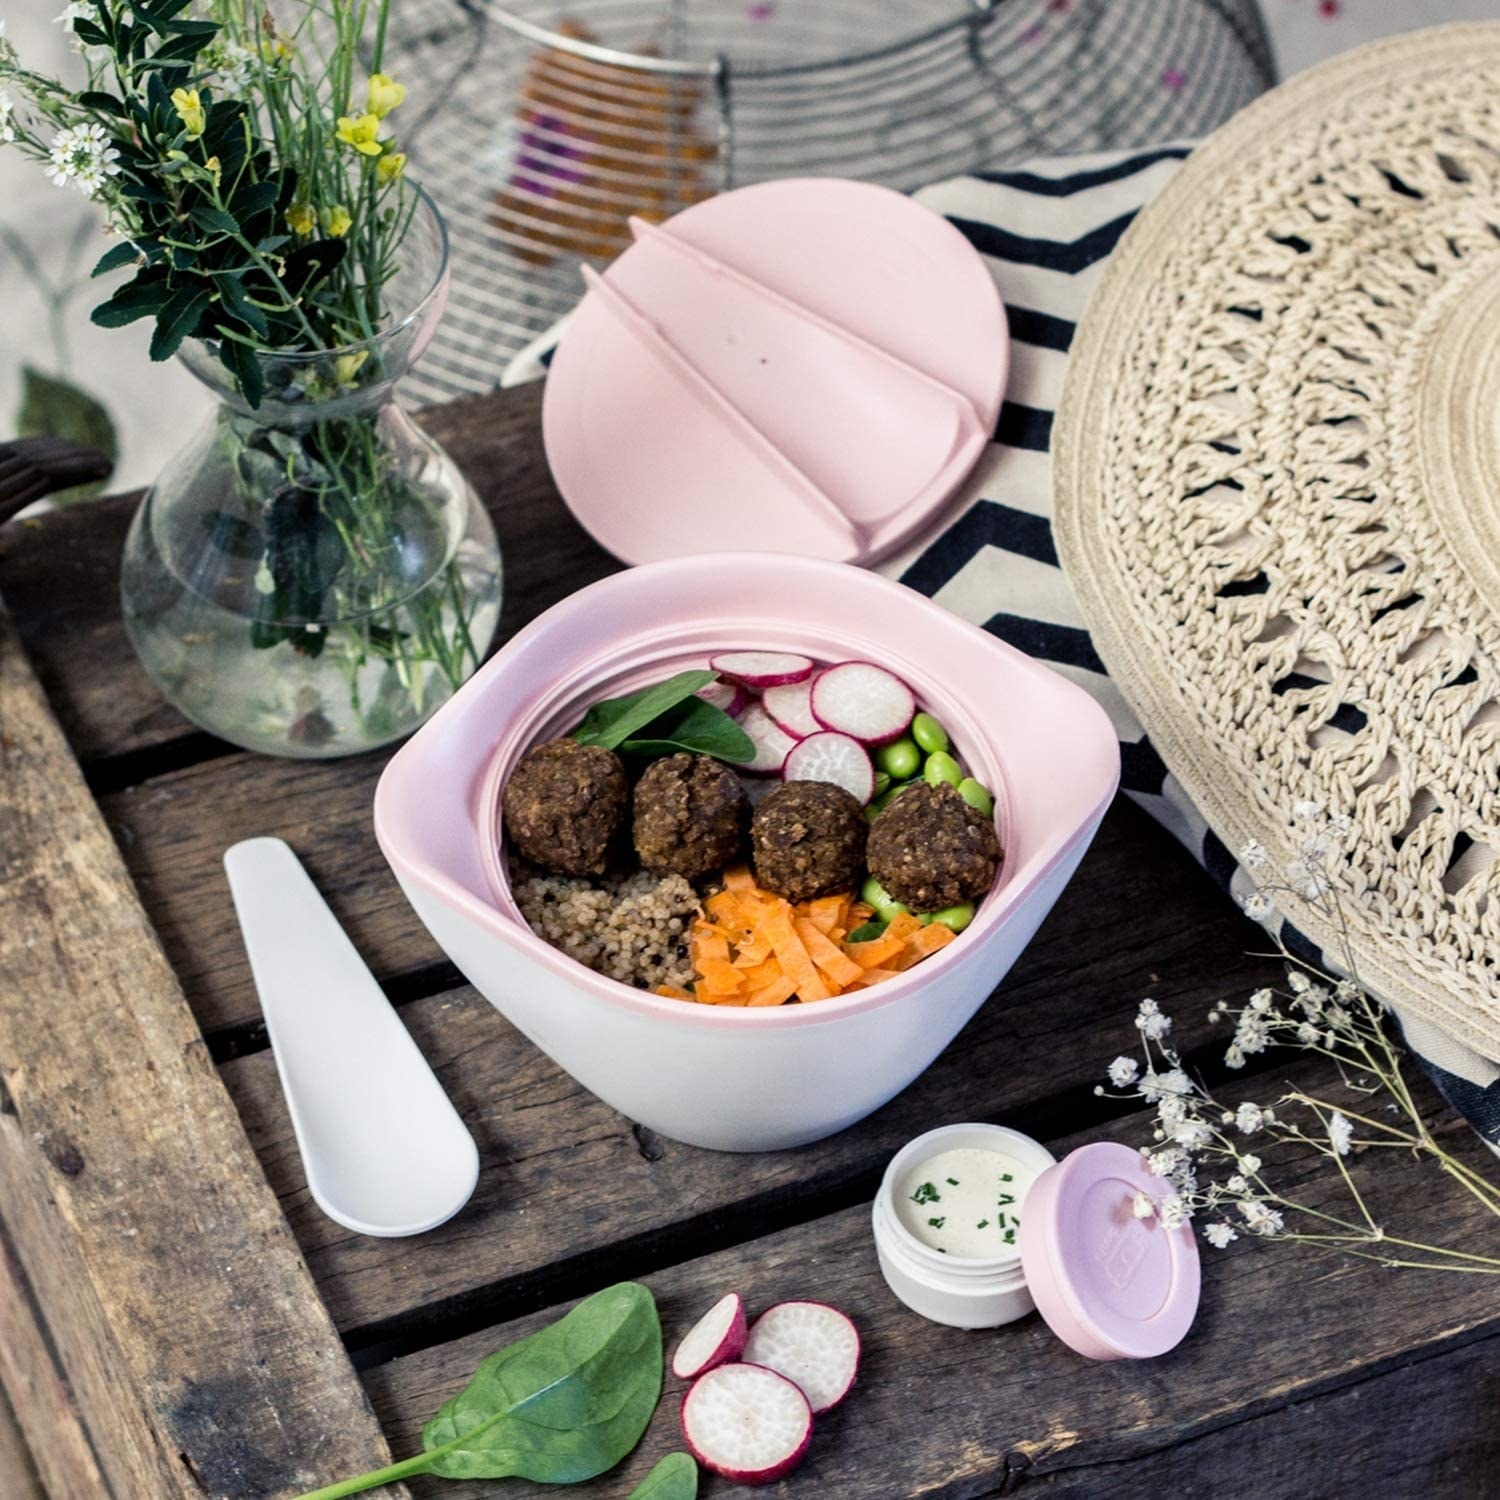 The bowl filled with a salad next to a vase of flowers